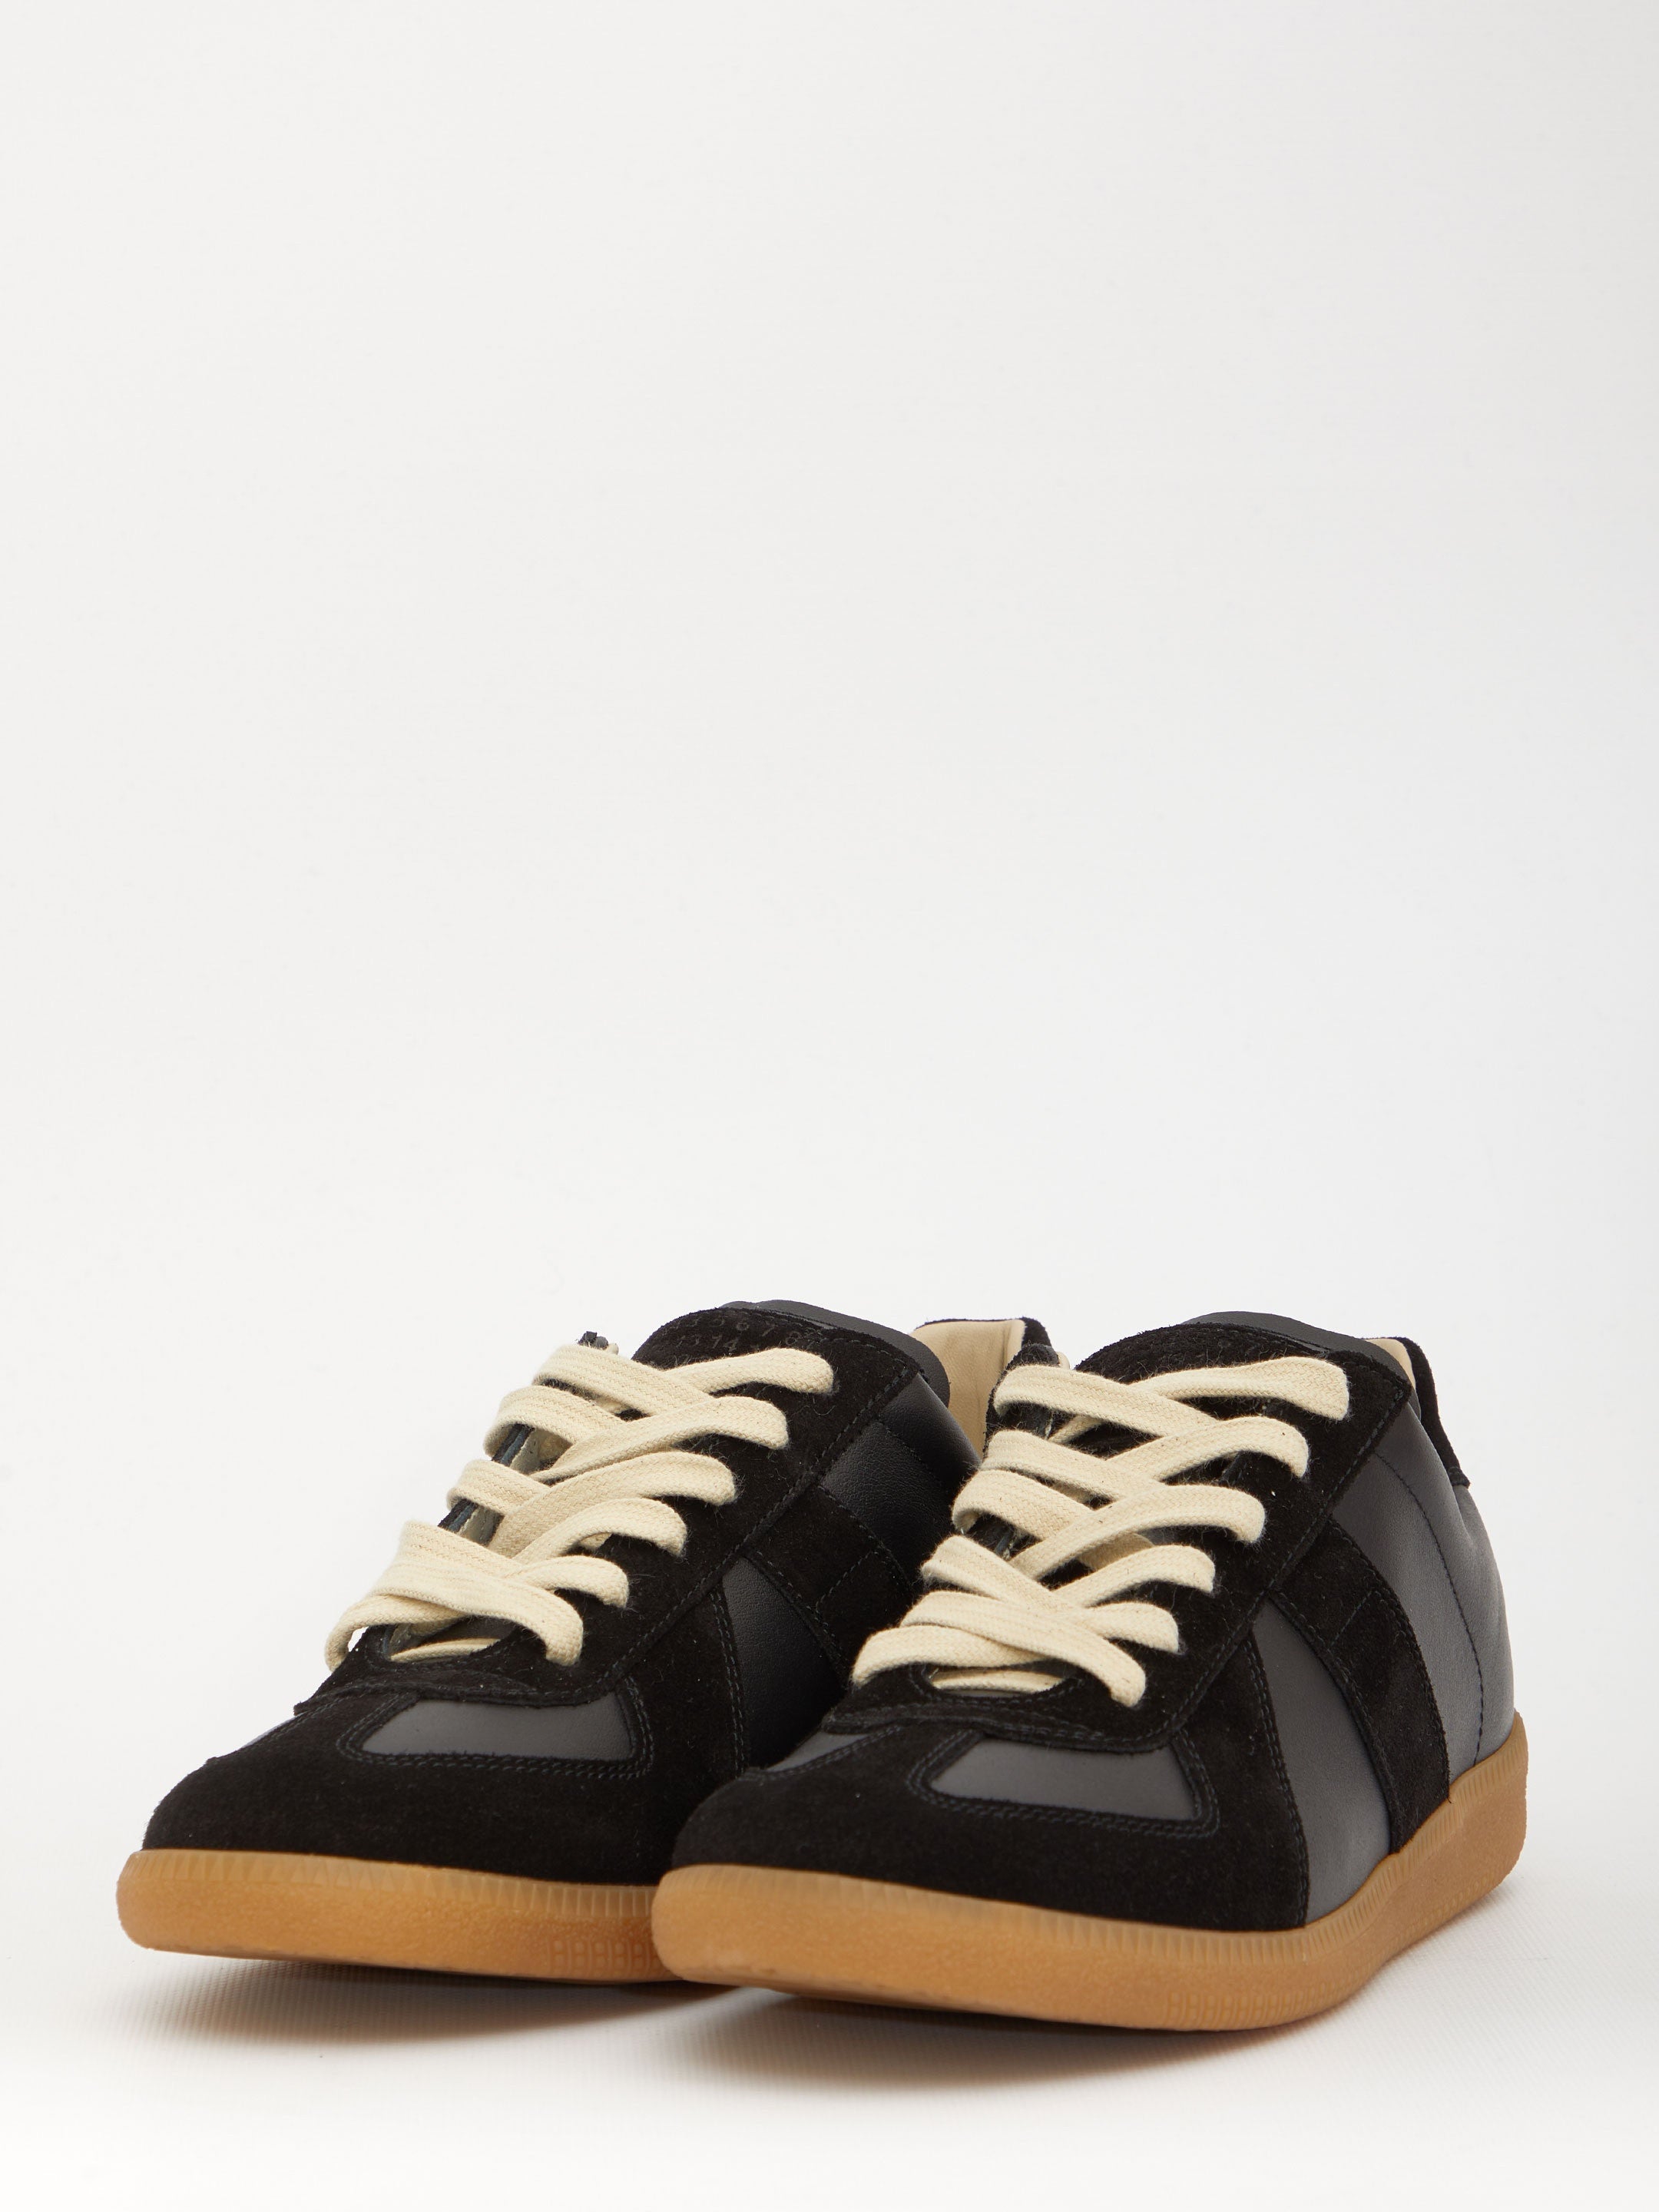 MAISON-MARGIELA-OUTLET-SALE-Replica-sneakers-Sneakers-ARCHIVE-COLLECTION-2.jpg